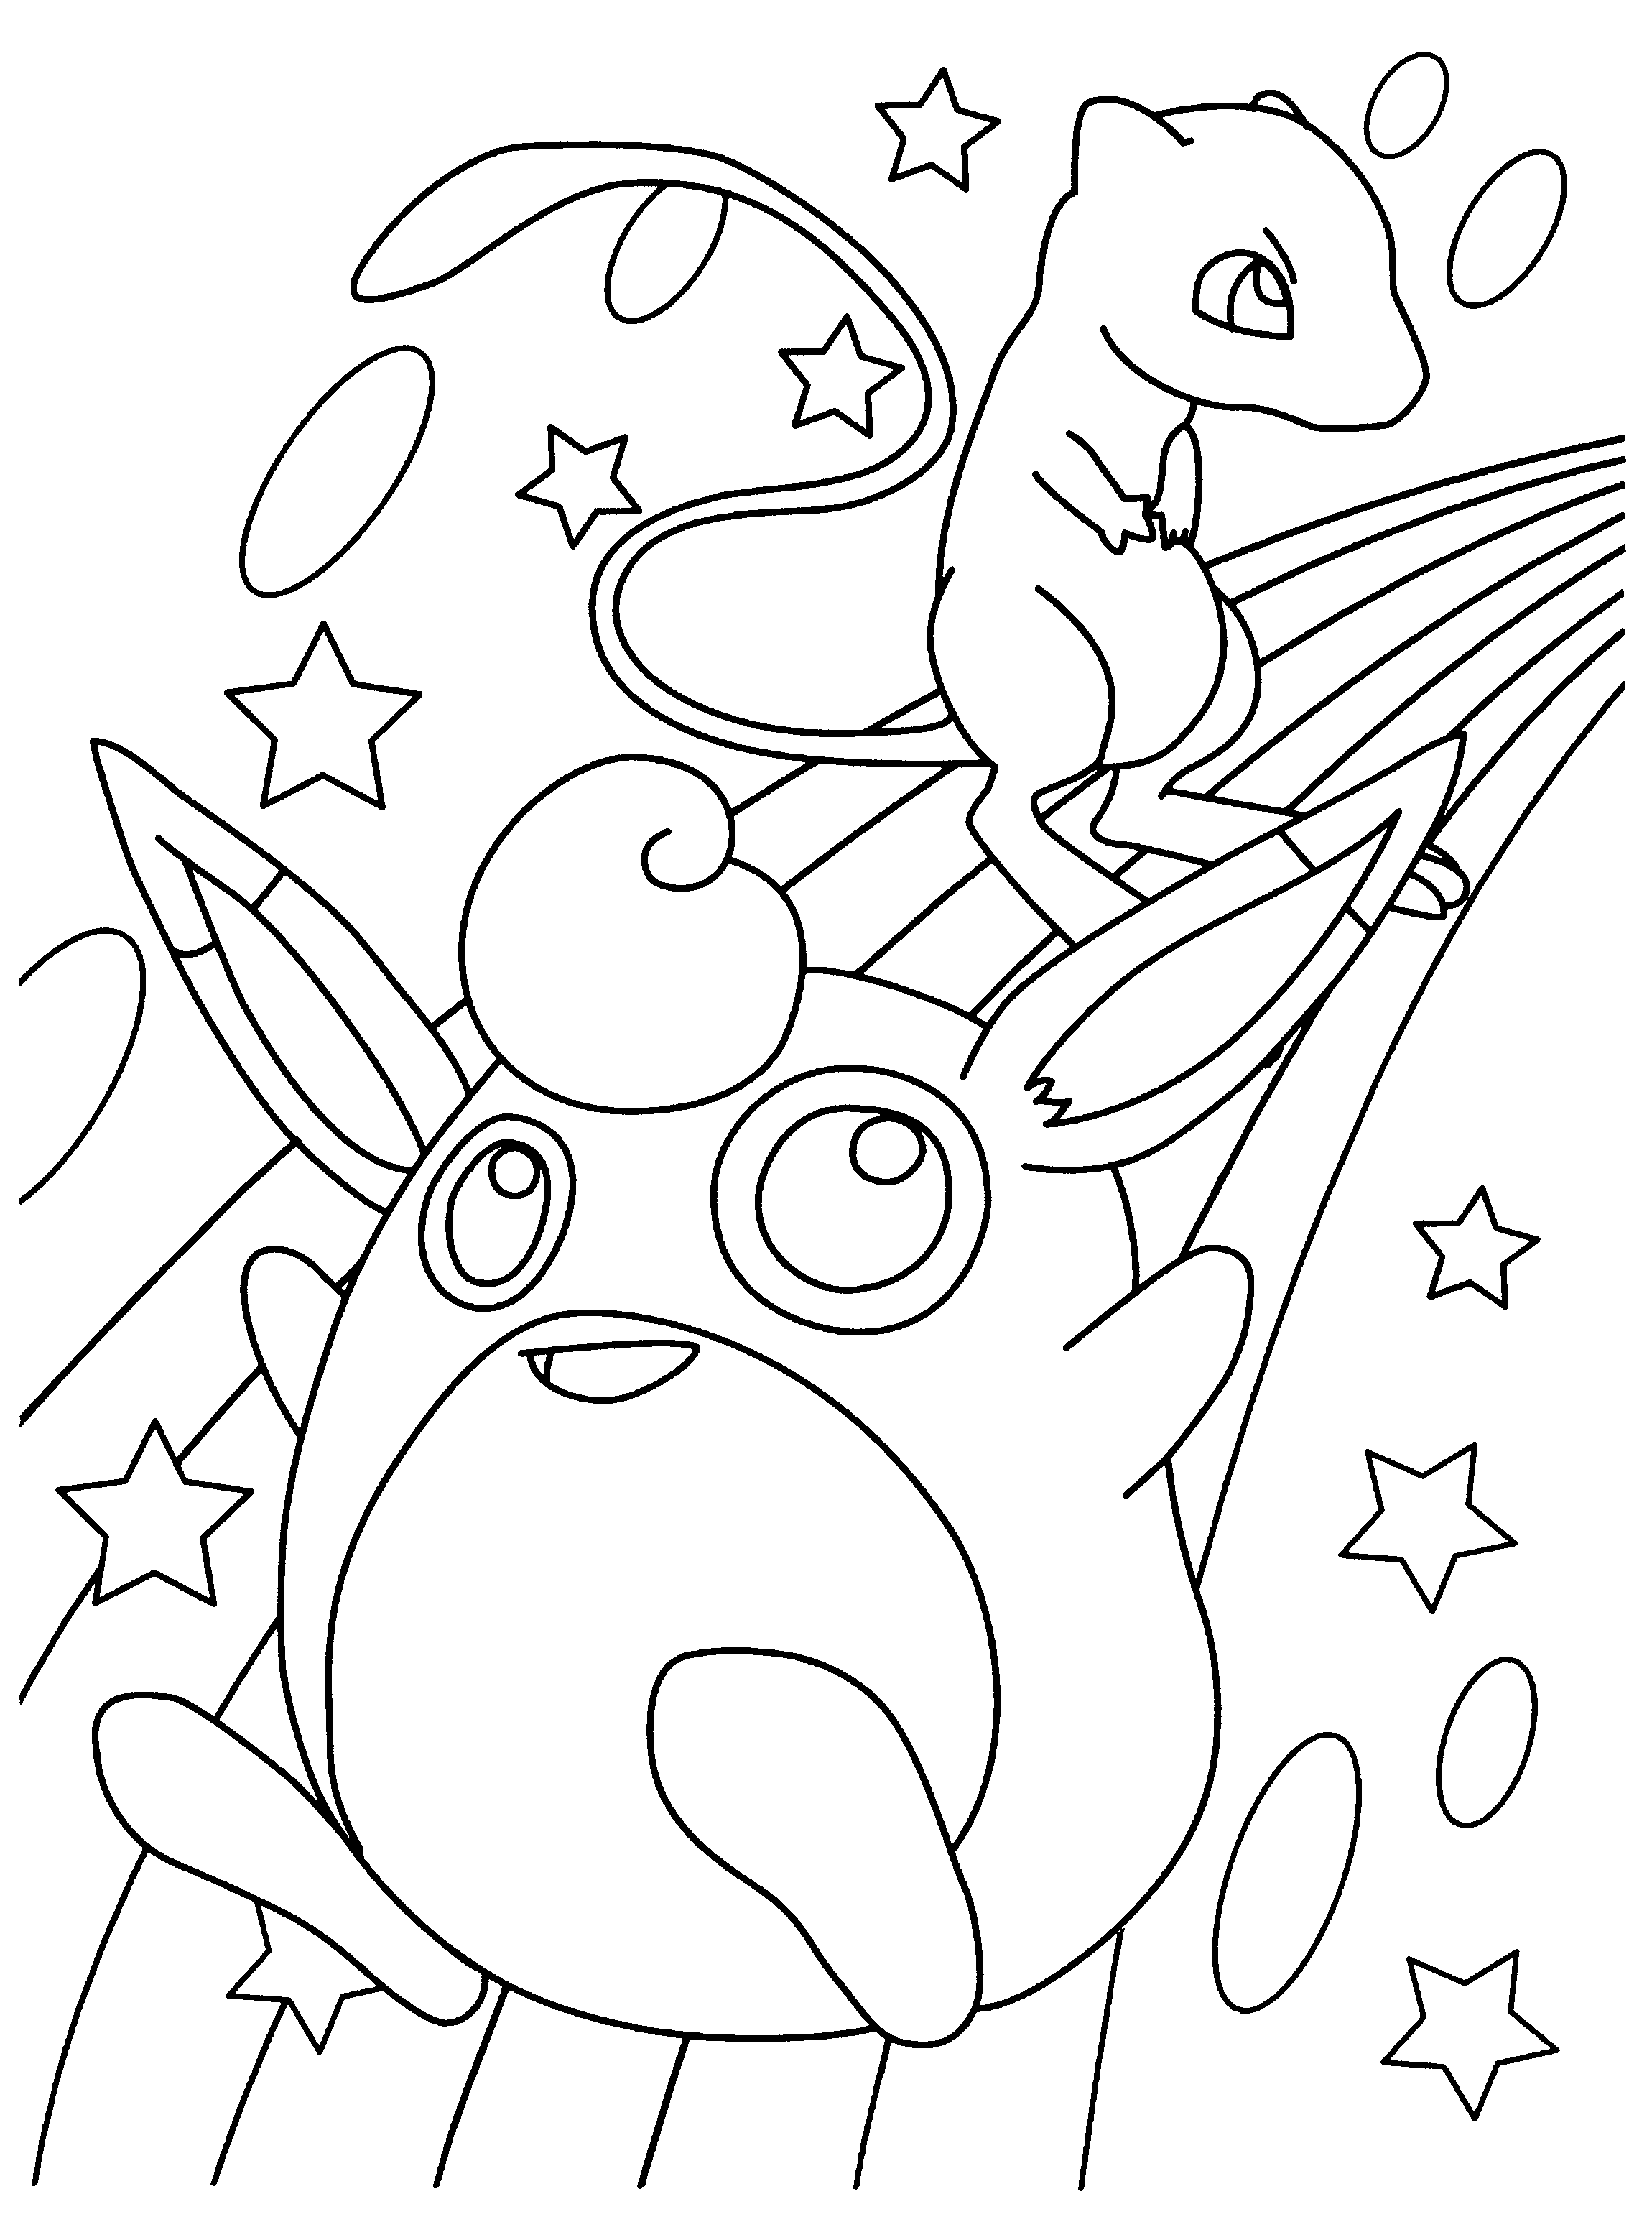 animated-coloring-pages-pokemon-image-0025